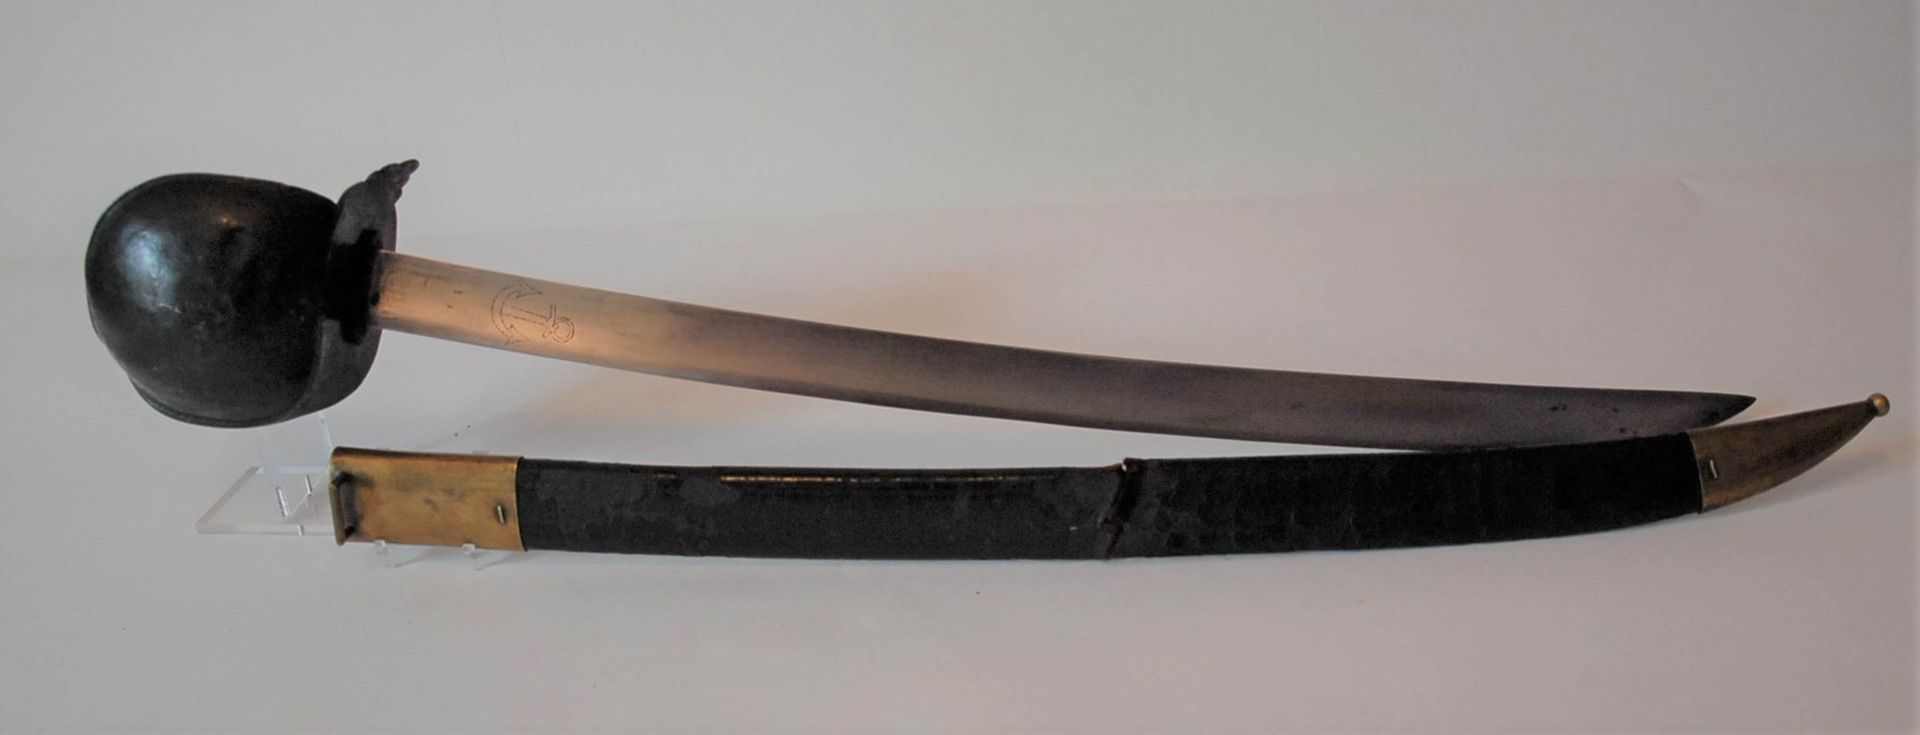 Null Sword of edge known as "Spoon with pot" model 1811. Black painted iron clam&hellip;